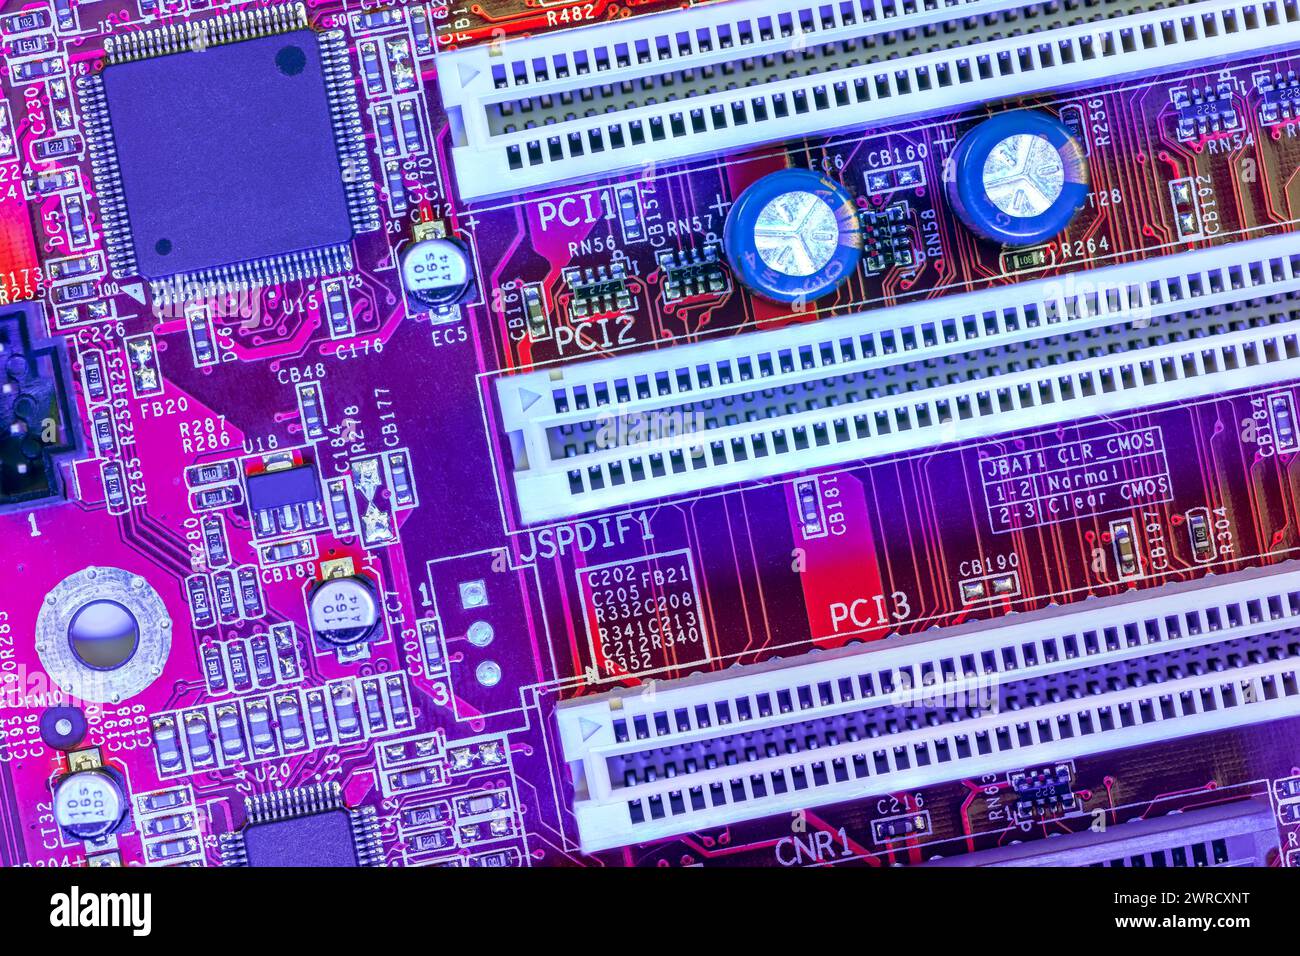 computer main board with sockets and chips. high-detailed view in blue red color. Stock Photo